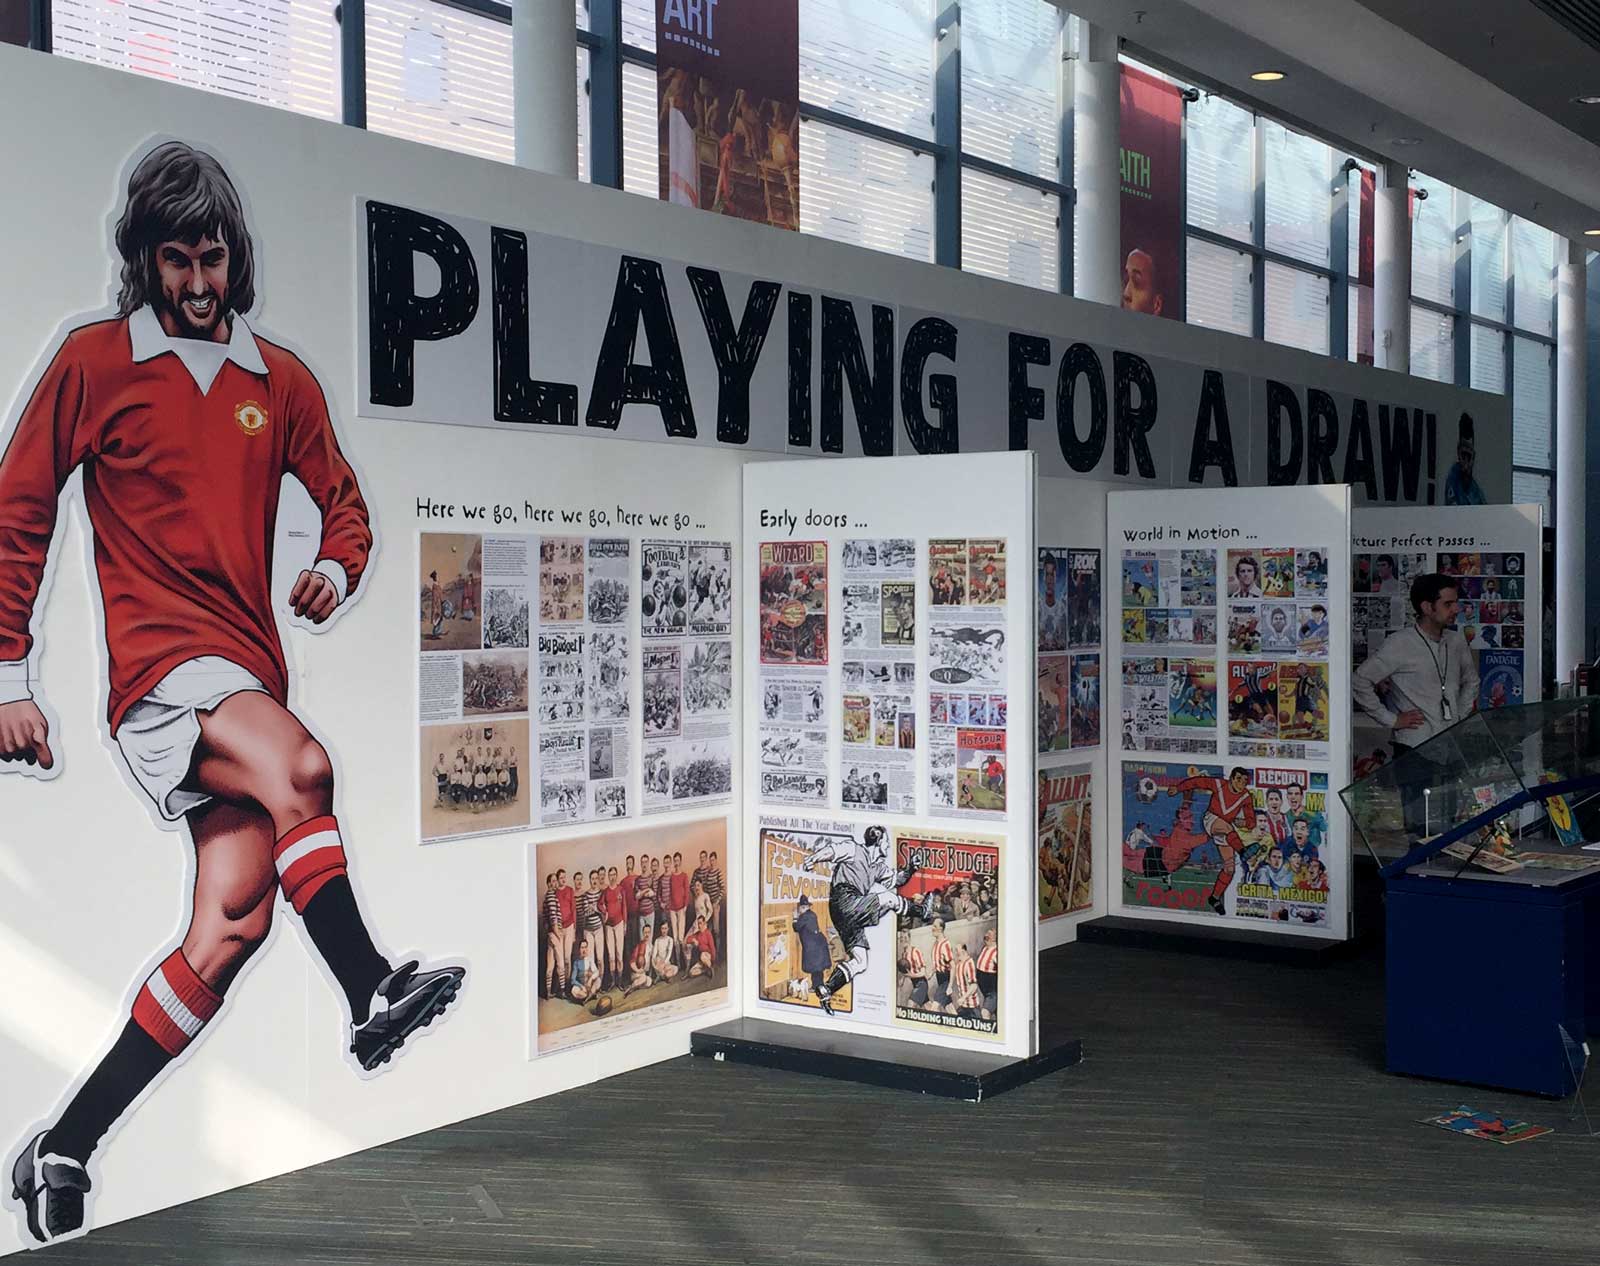 Playing for a Draw - National Football Museum Exhibition 2018